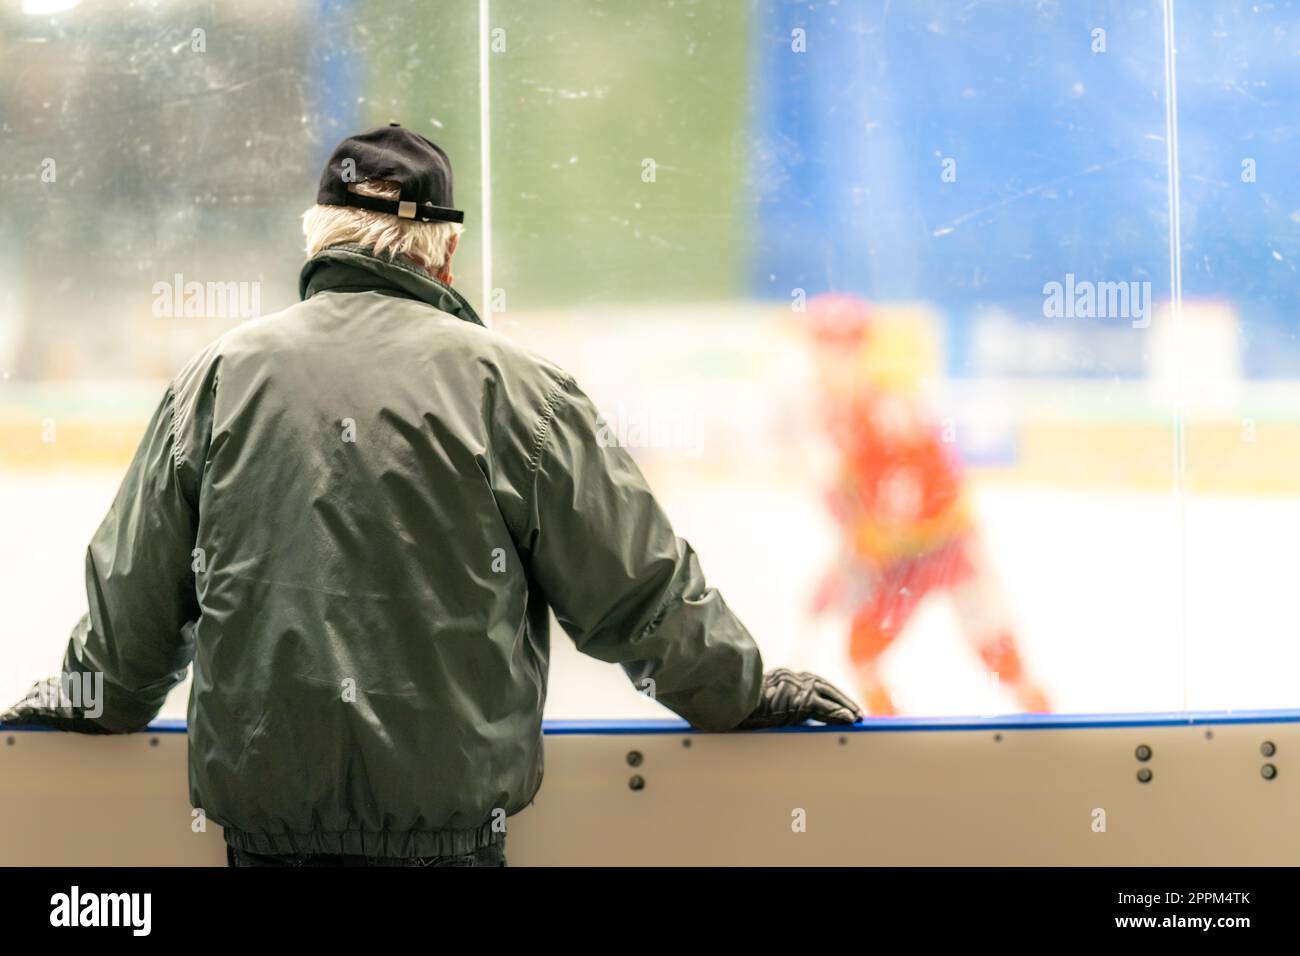 a spectator at a game in a hockey stadium Stock Photo